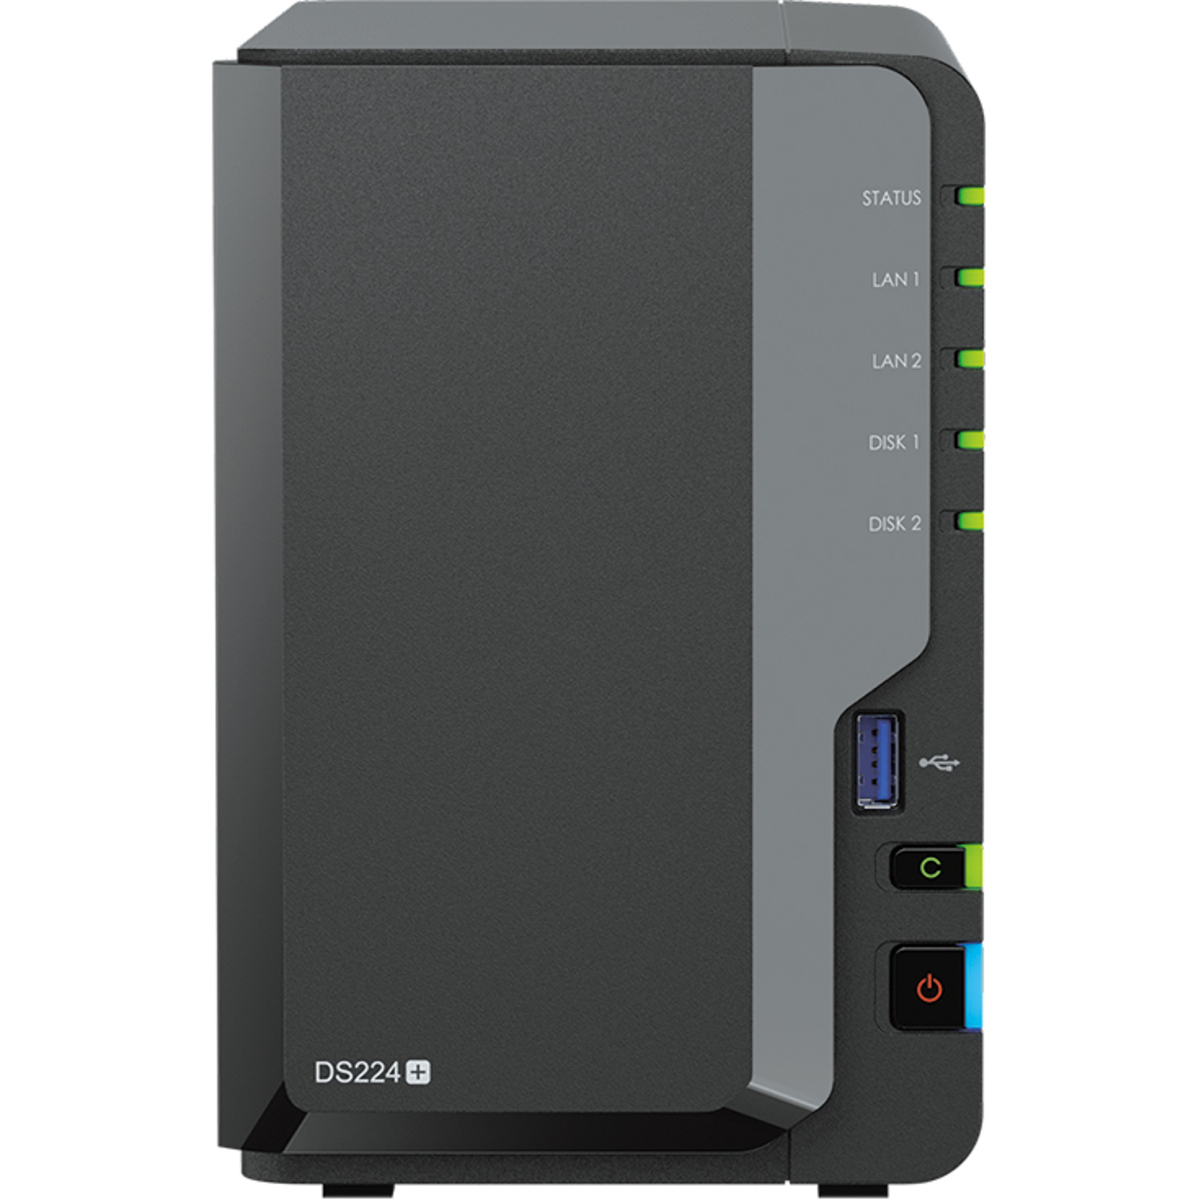 Synology DiskStation DS224+ 16tb 2-Bay Desktop Personal / Basic Home / Small Office NAS - Network Attached Storage Device 1x16tb Seagate IronWolf Pro ST16000NT001 3.5 7200rpm SATA 6Gb/s HDD NAS Class Drives Installed - Burn-In Tested - ON SALE - FREE RAM UPGRADE DiskStation DS224+